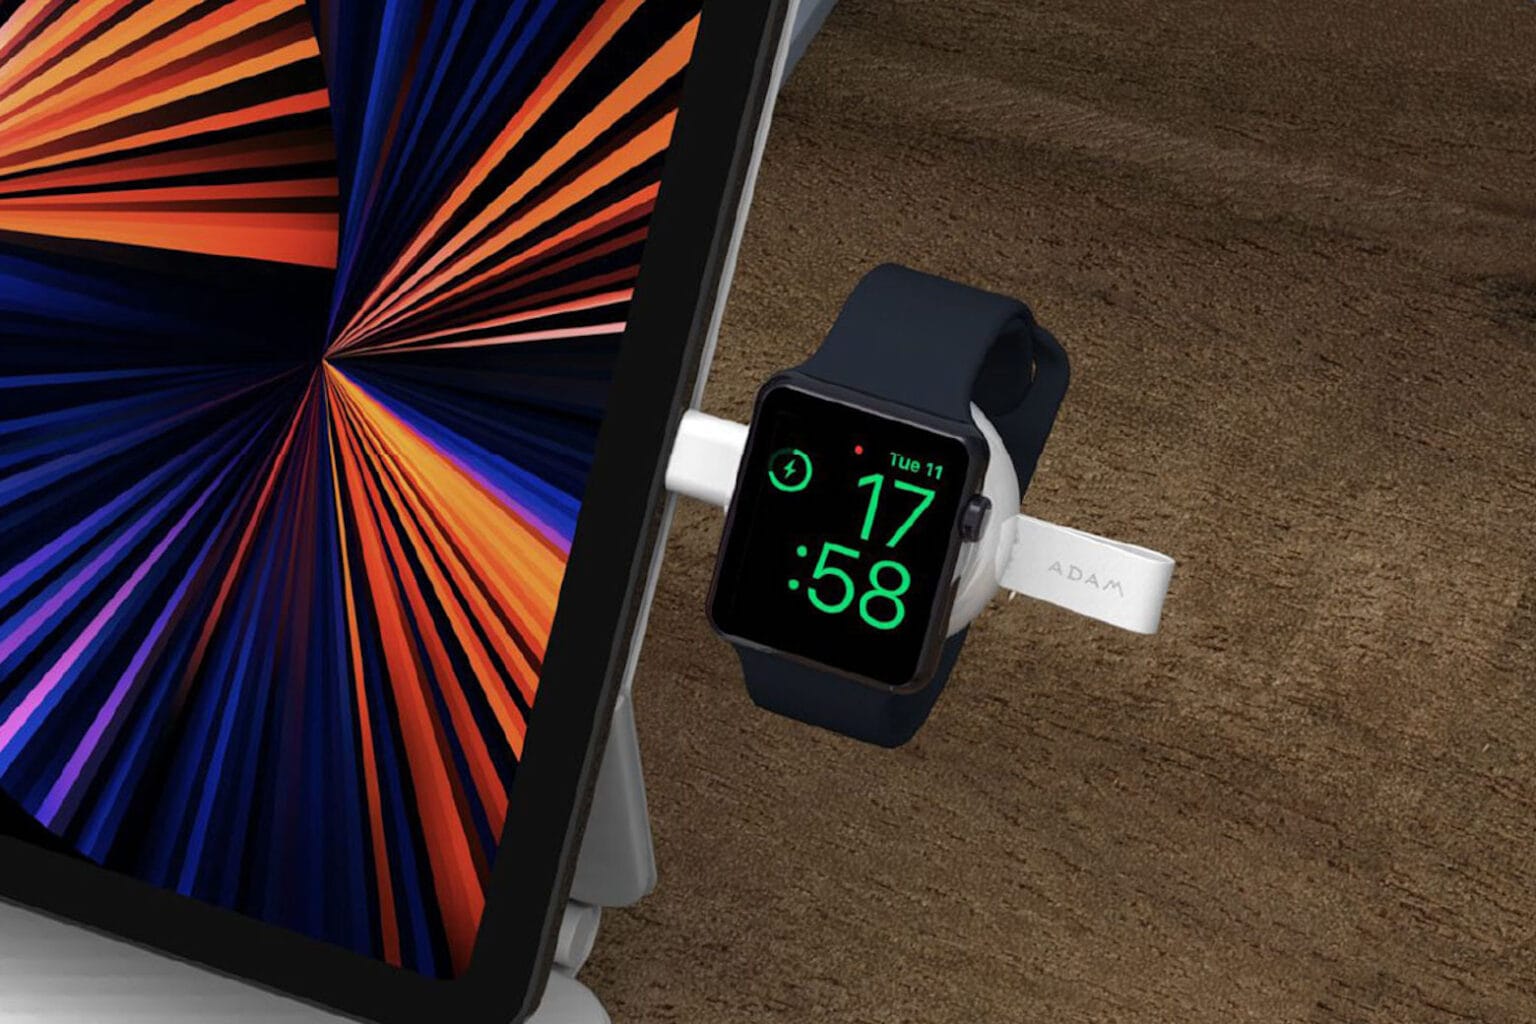 It's time to get a charger that's right for your Apple Watch.